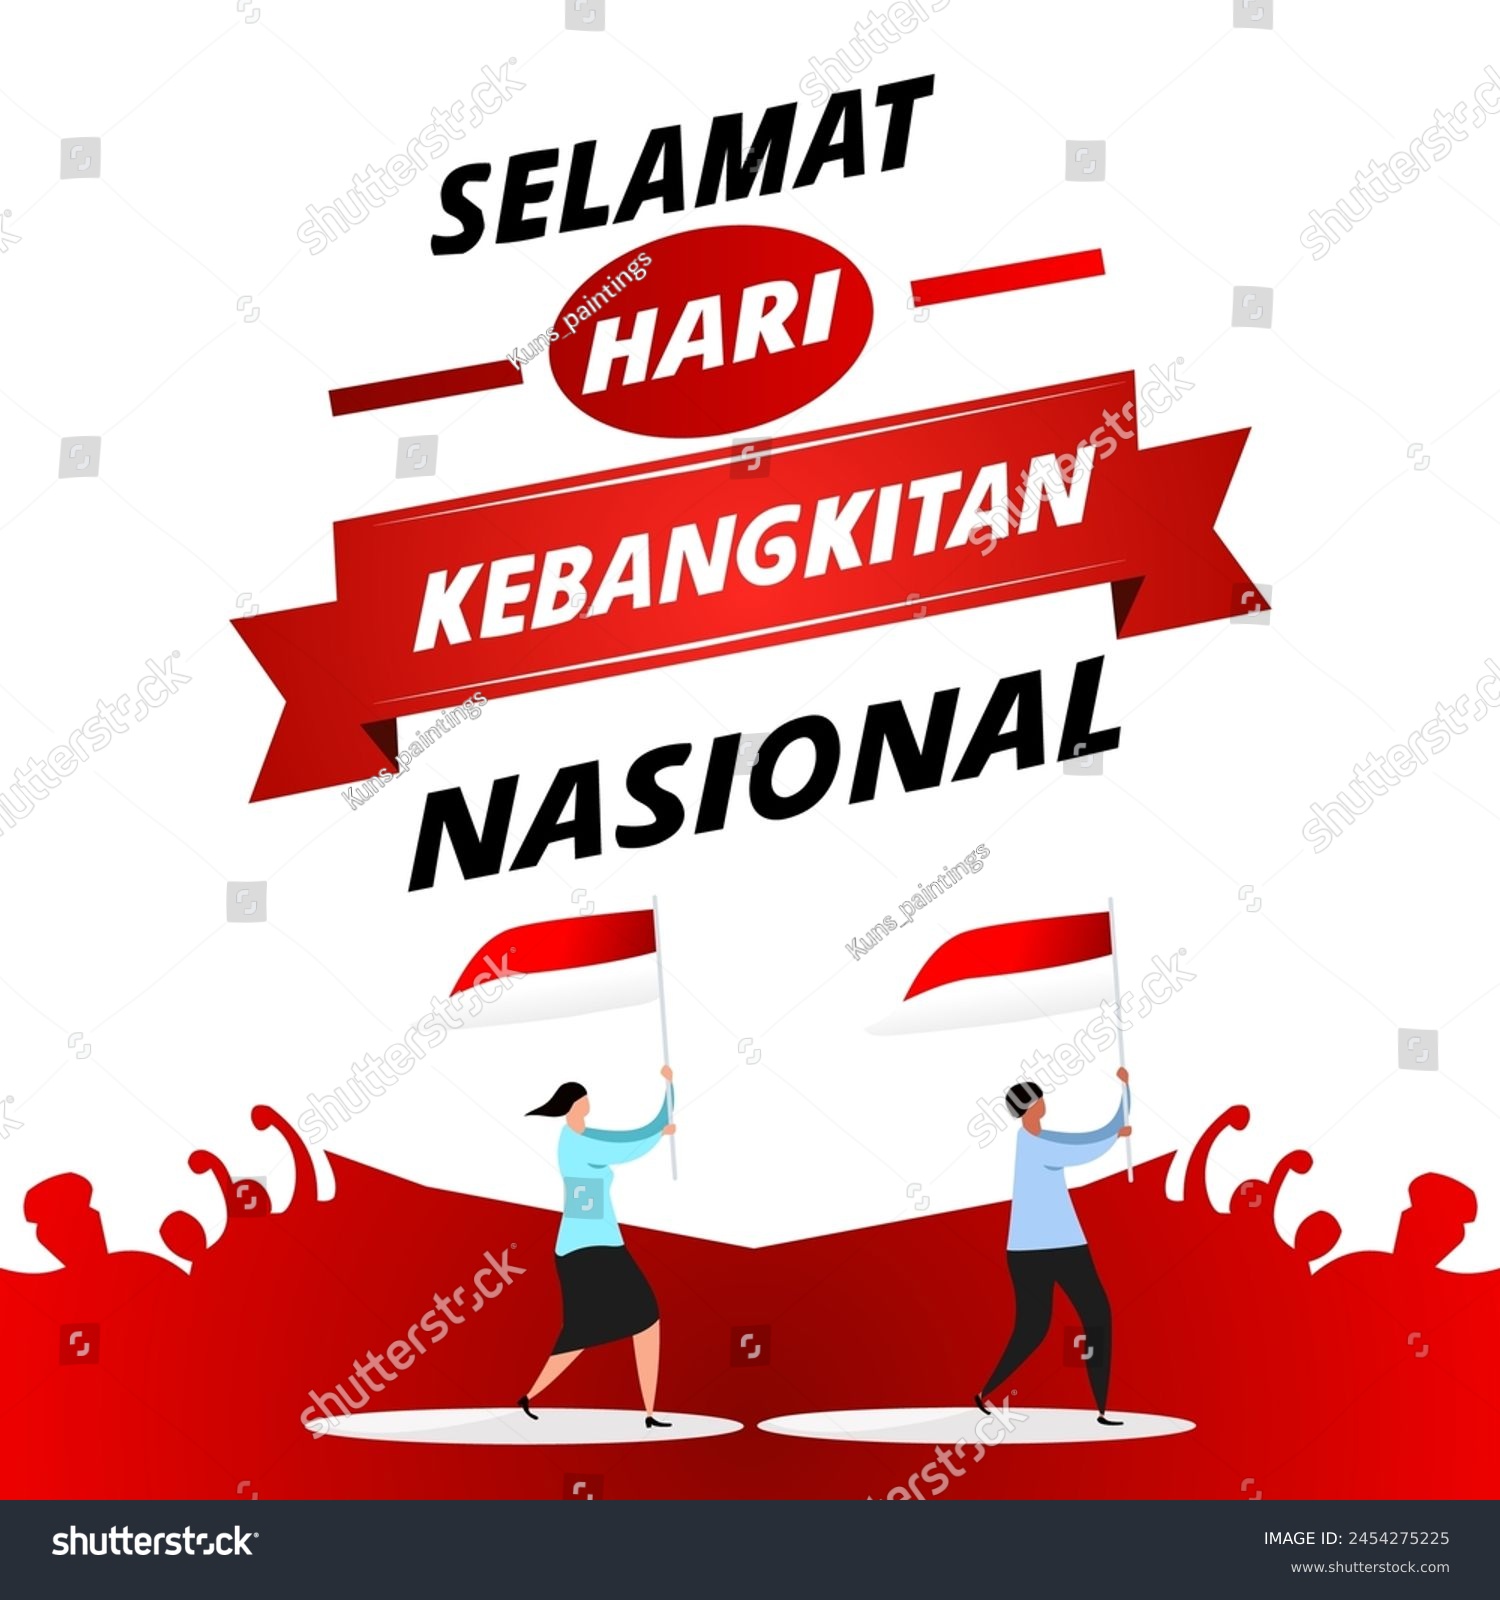 SVG of commemoration of Indonesia's historic day with the words 